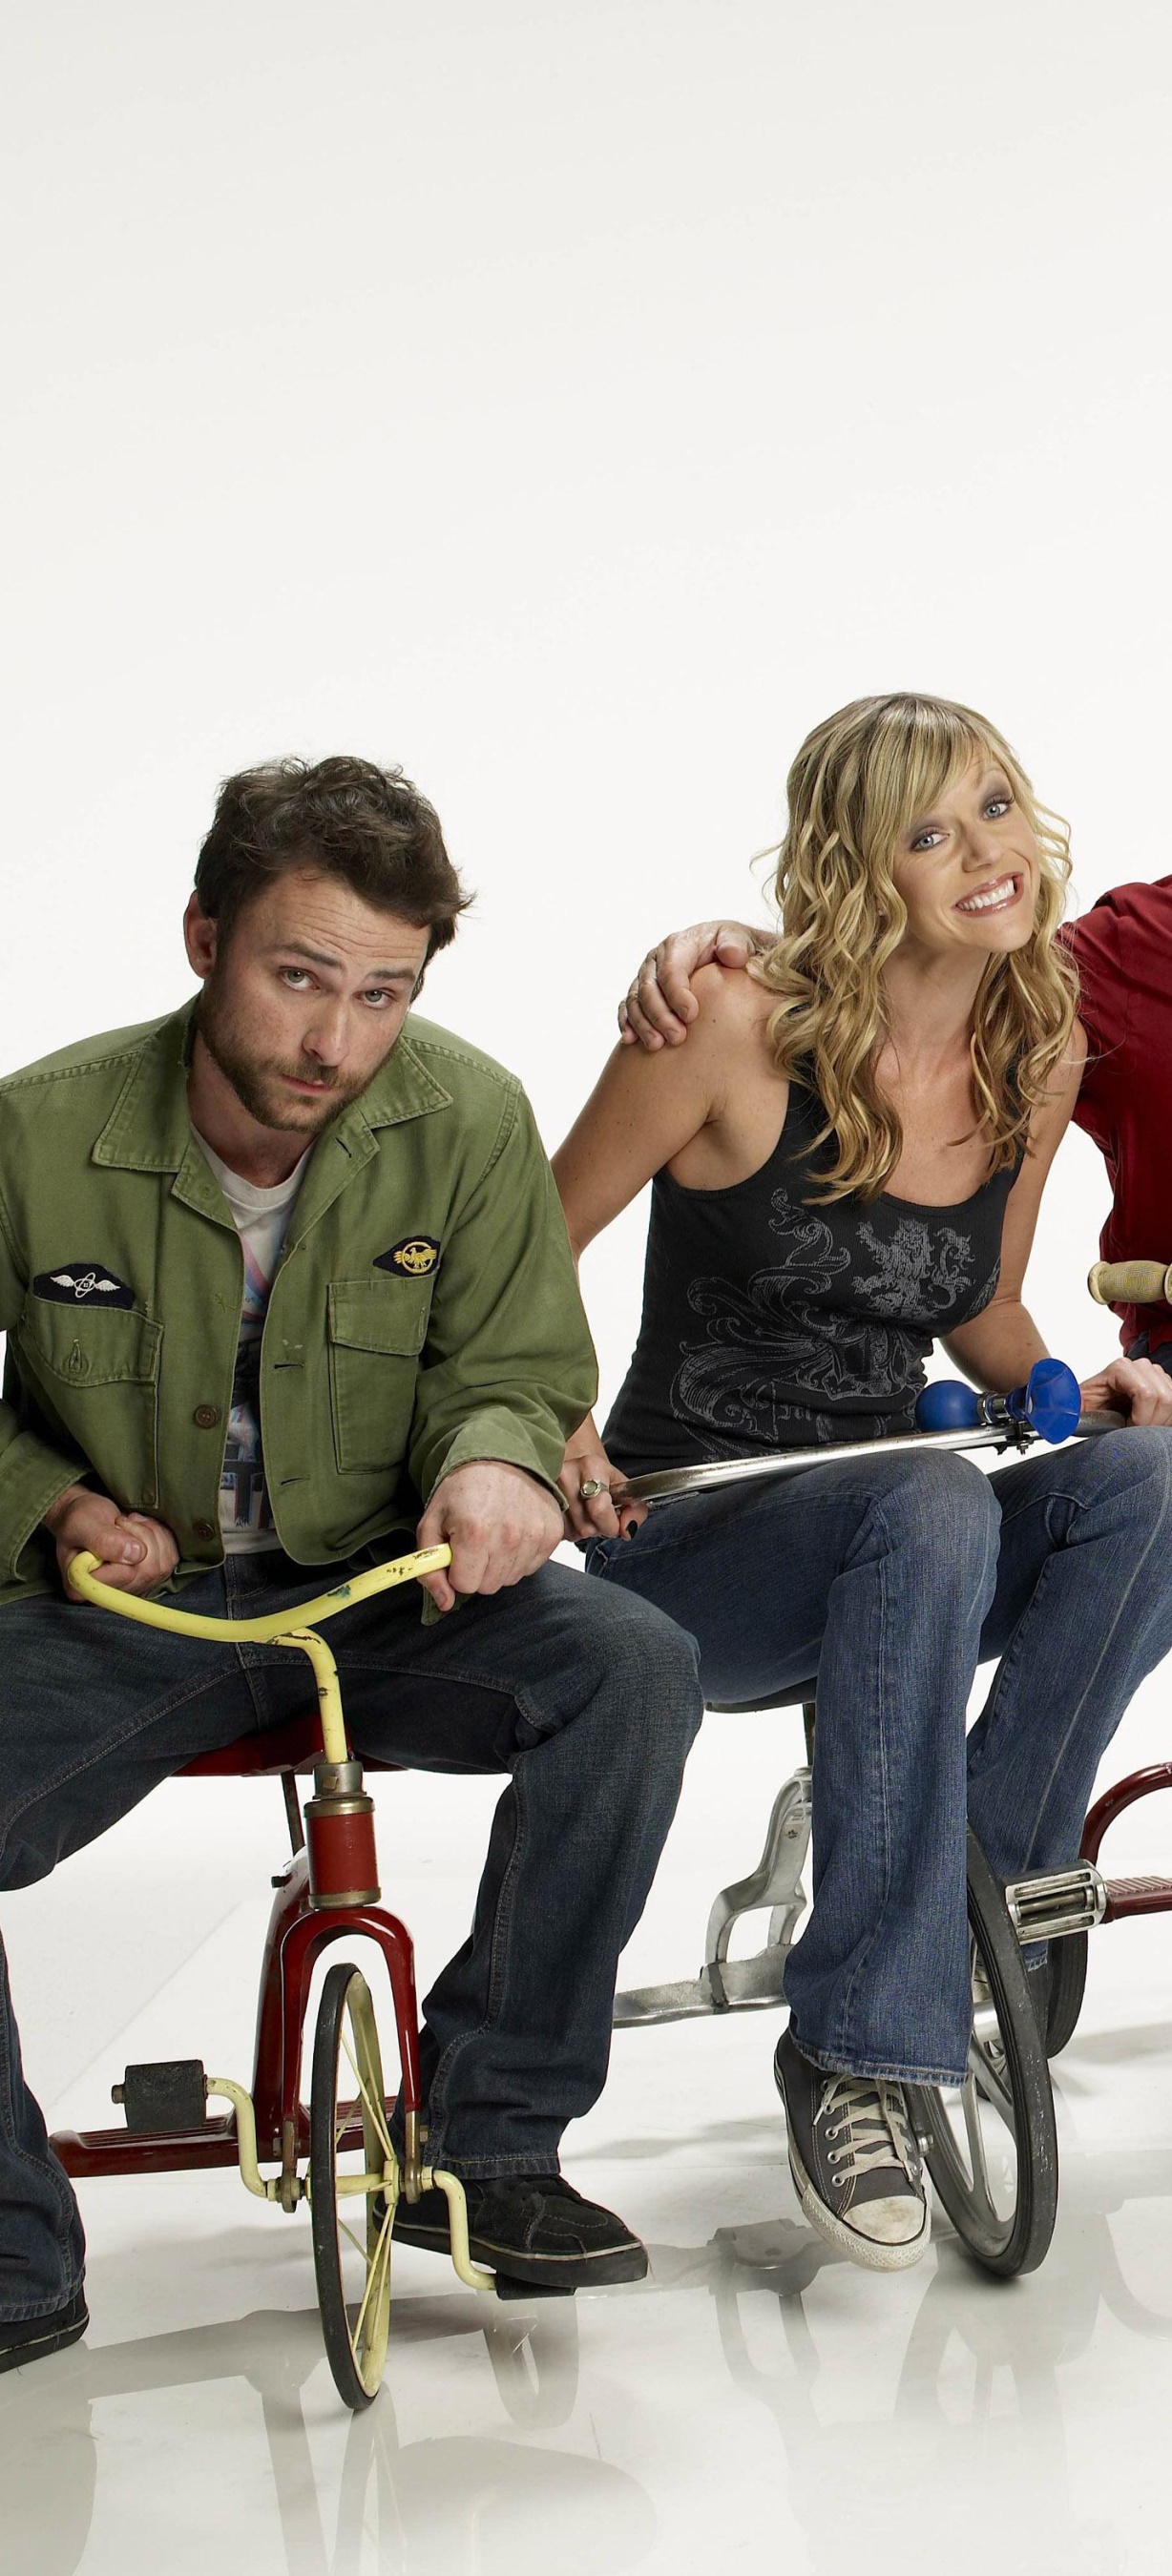 Wallpaper / TV Show Its Always Sunny In Philadelphia Phone Wallpaper, Charlie Day, Kaitlin Olson, Dee Reynolds, Charlie Kelly, 1228x2700 free download